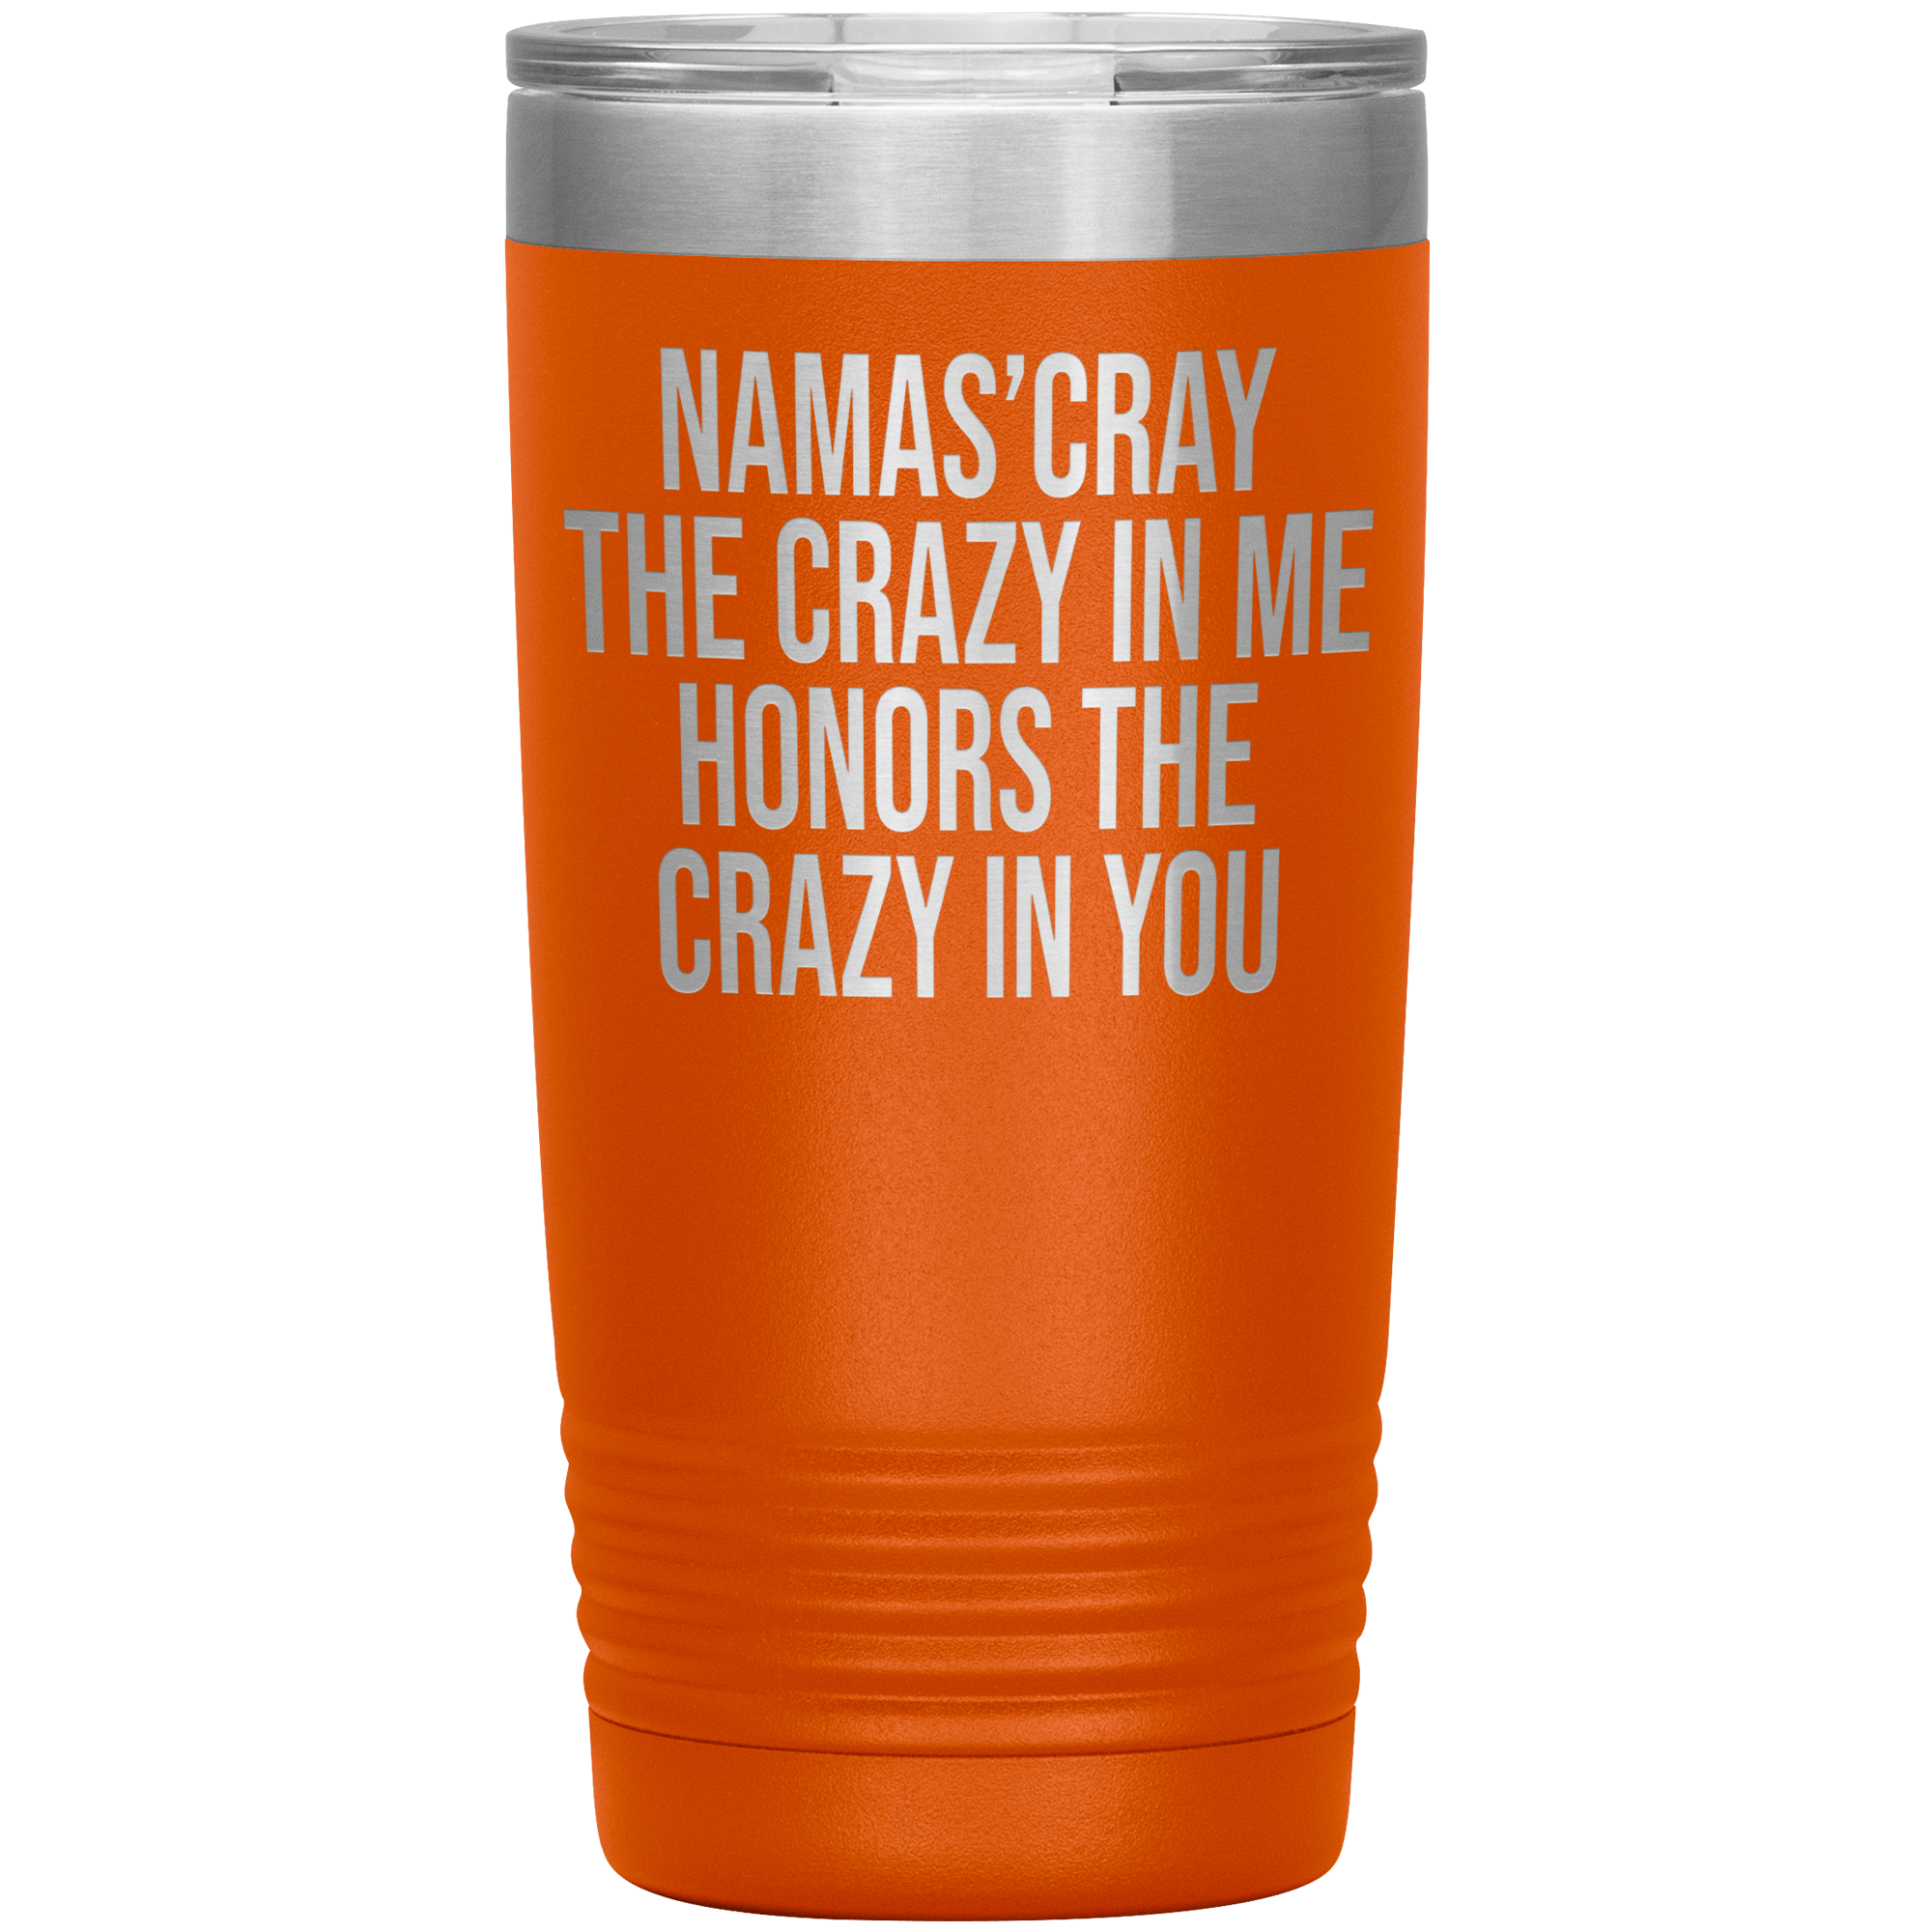 " THE CRAZY IN MY HONORS THE CRAZY IN YOU " TUMBLER